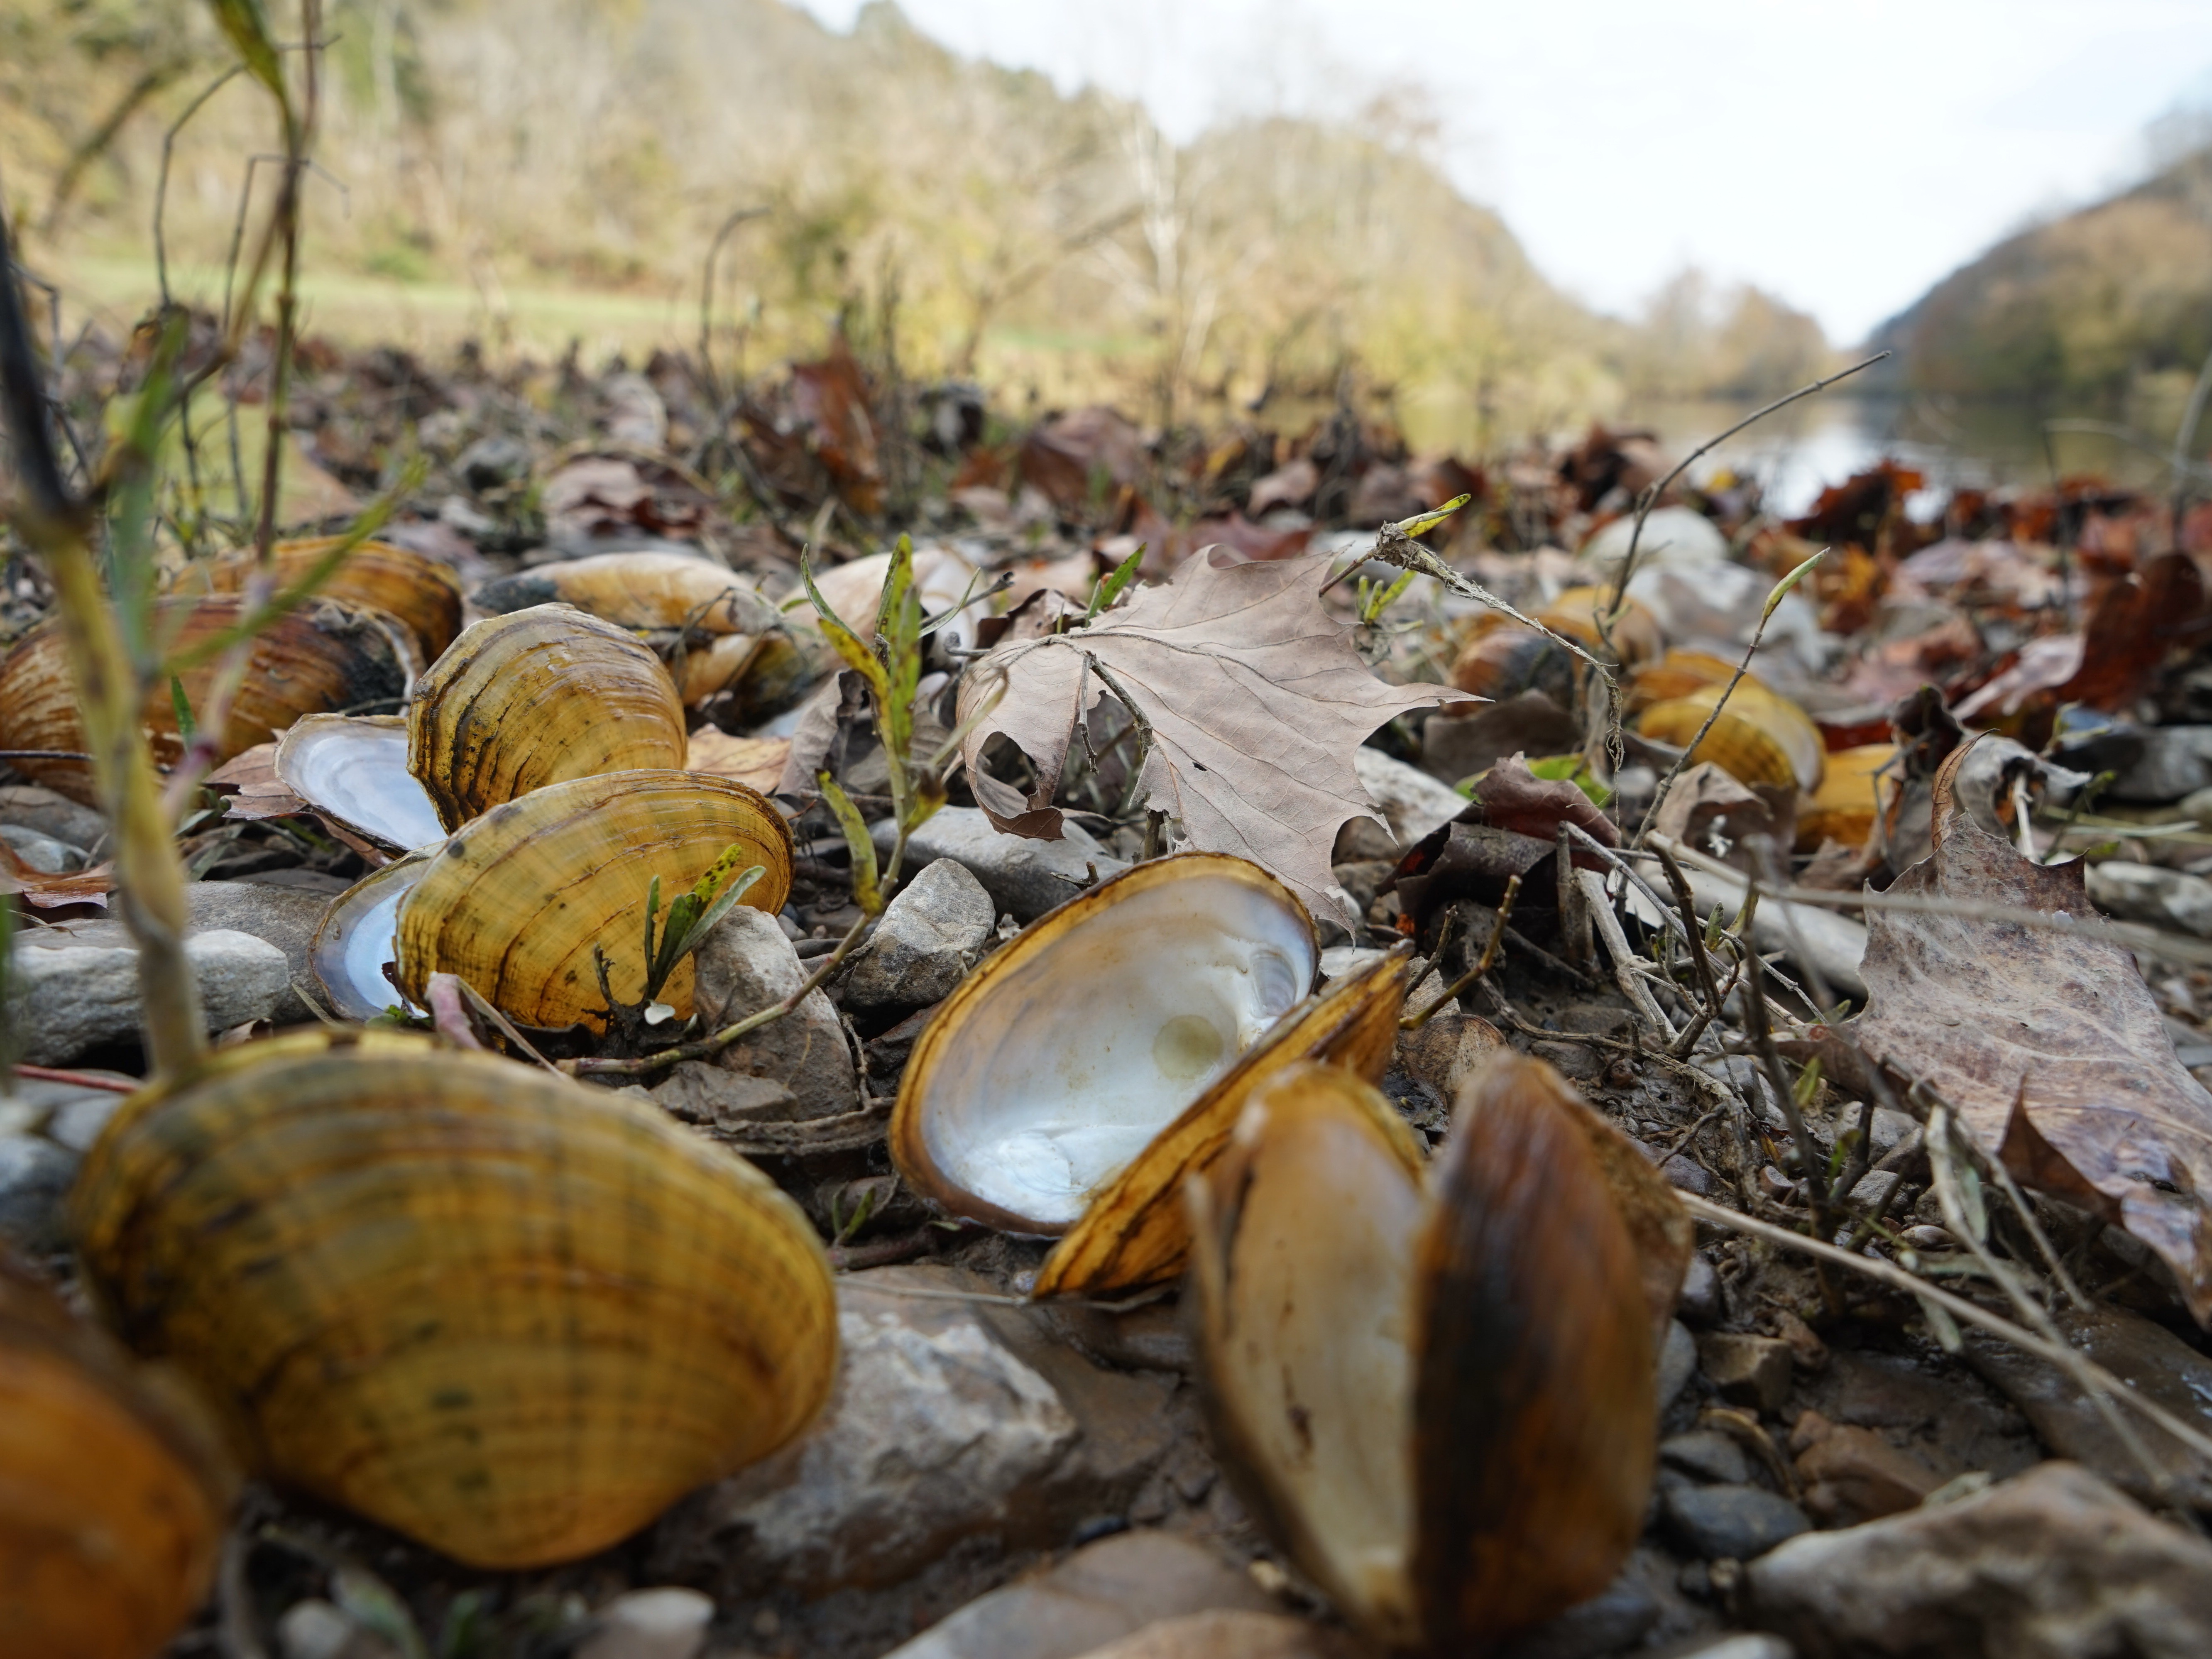 Biologists pile recently dead mussel shells on the edge of the Clinch River after documenting the species' number and type. The smell can get "real bad," says biologist Rose Agbalog. CREDIT: Nathan Rott/NPR